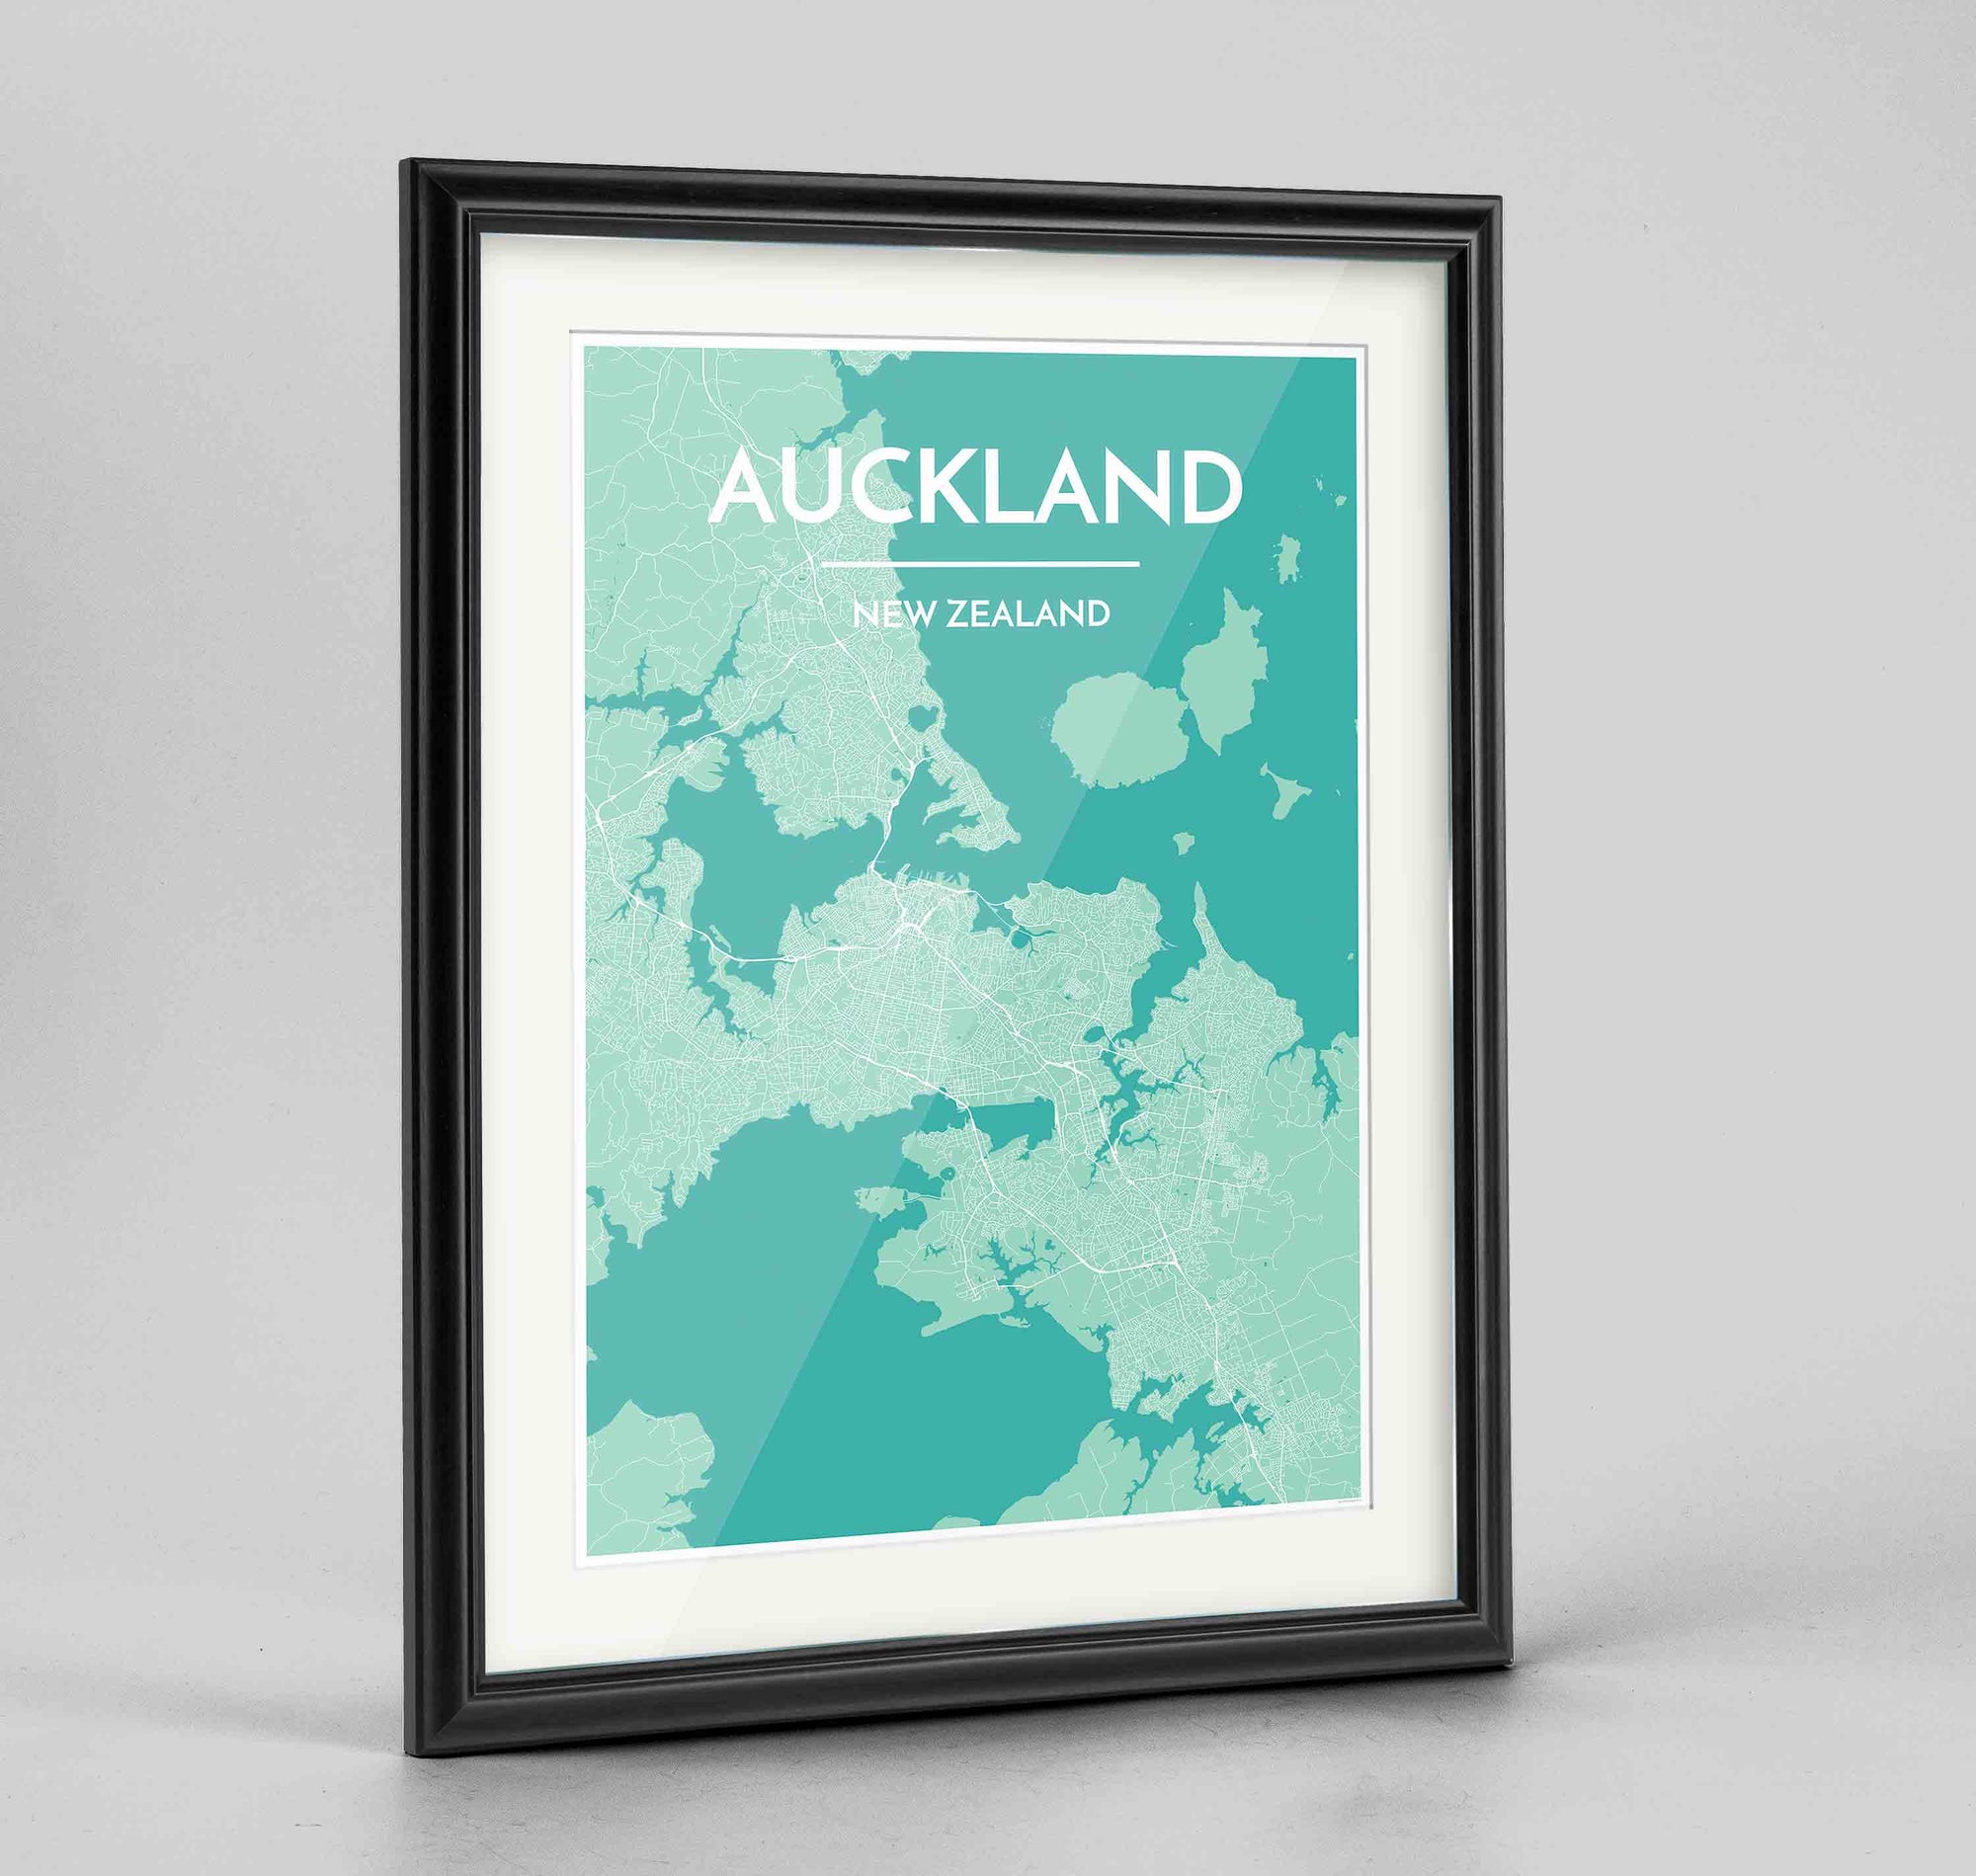 Framed Auckland Map Art Print 24x36" Traditional Black frame Point Two Design Group